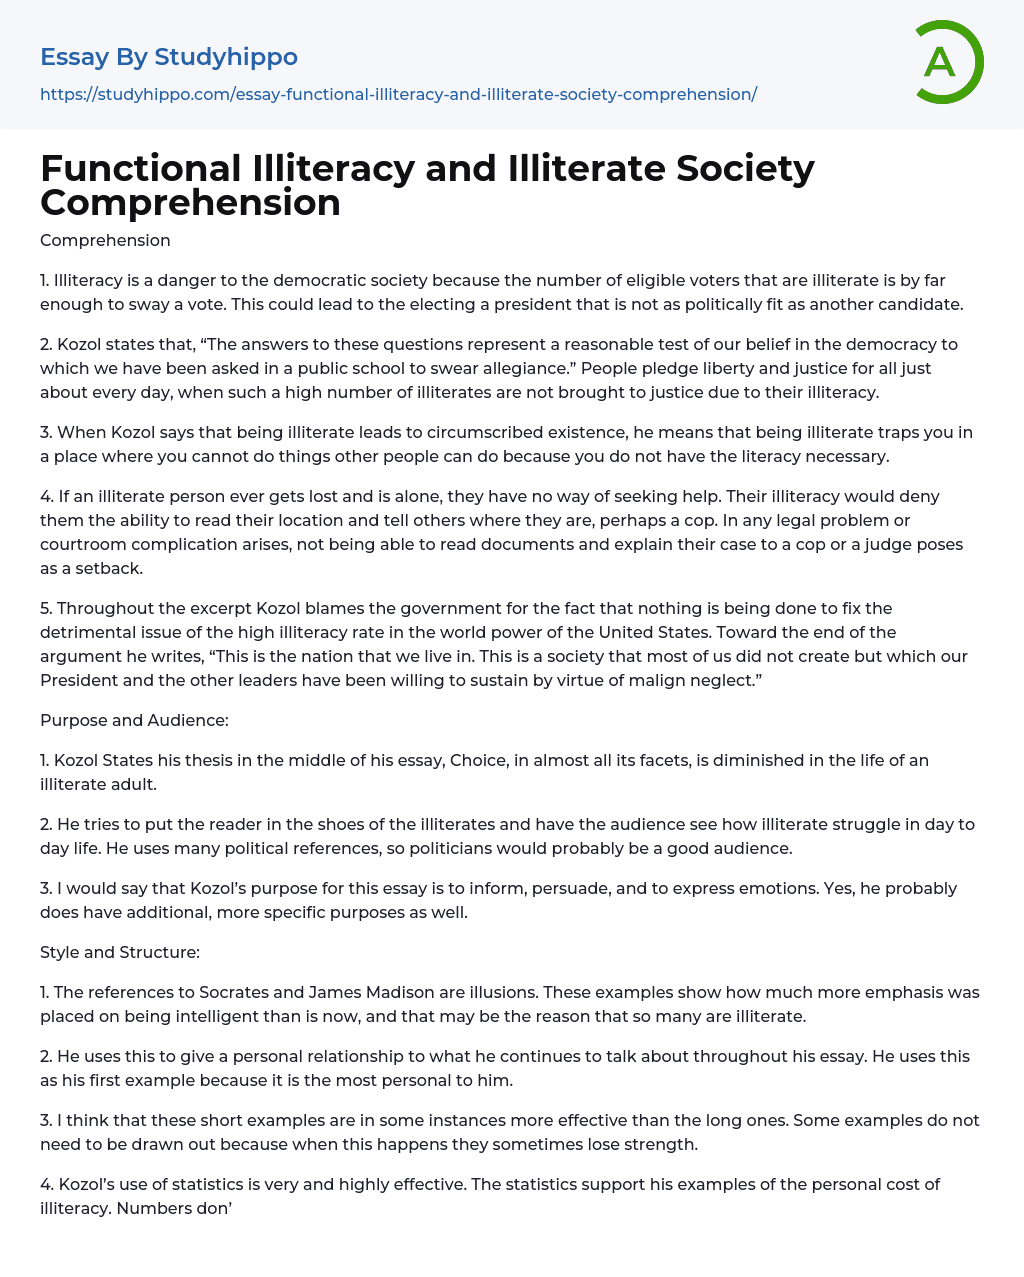 Functional Illiteracy and Illiterate Society Comprehension Essay Example